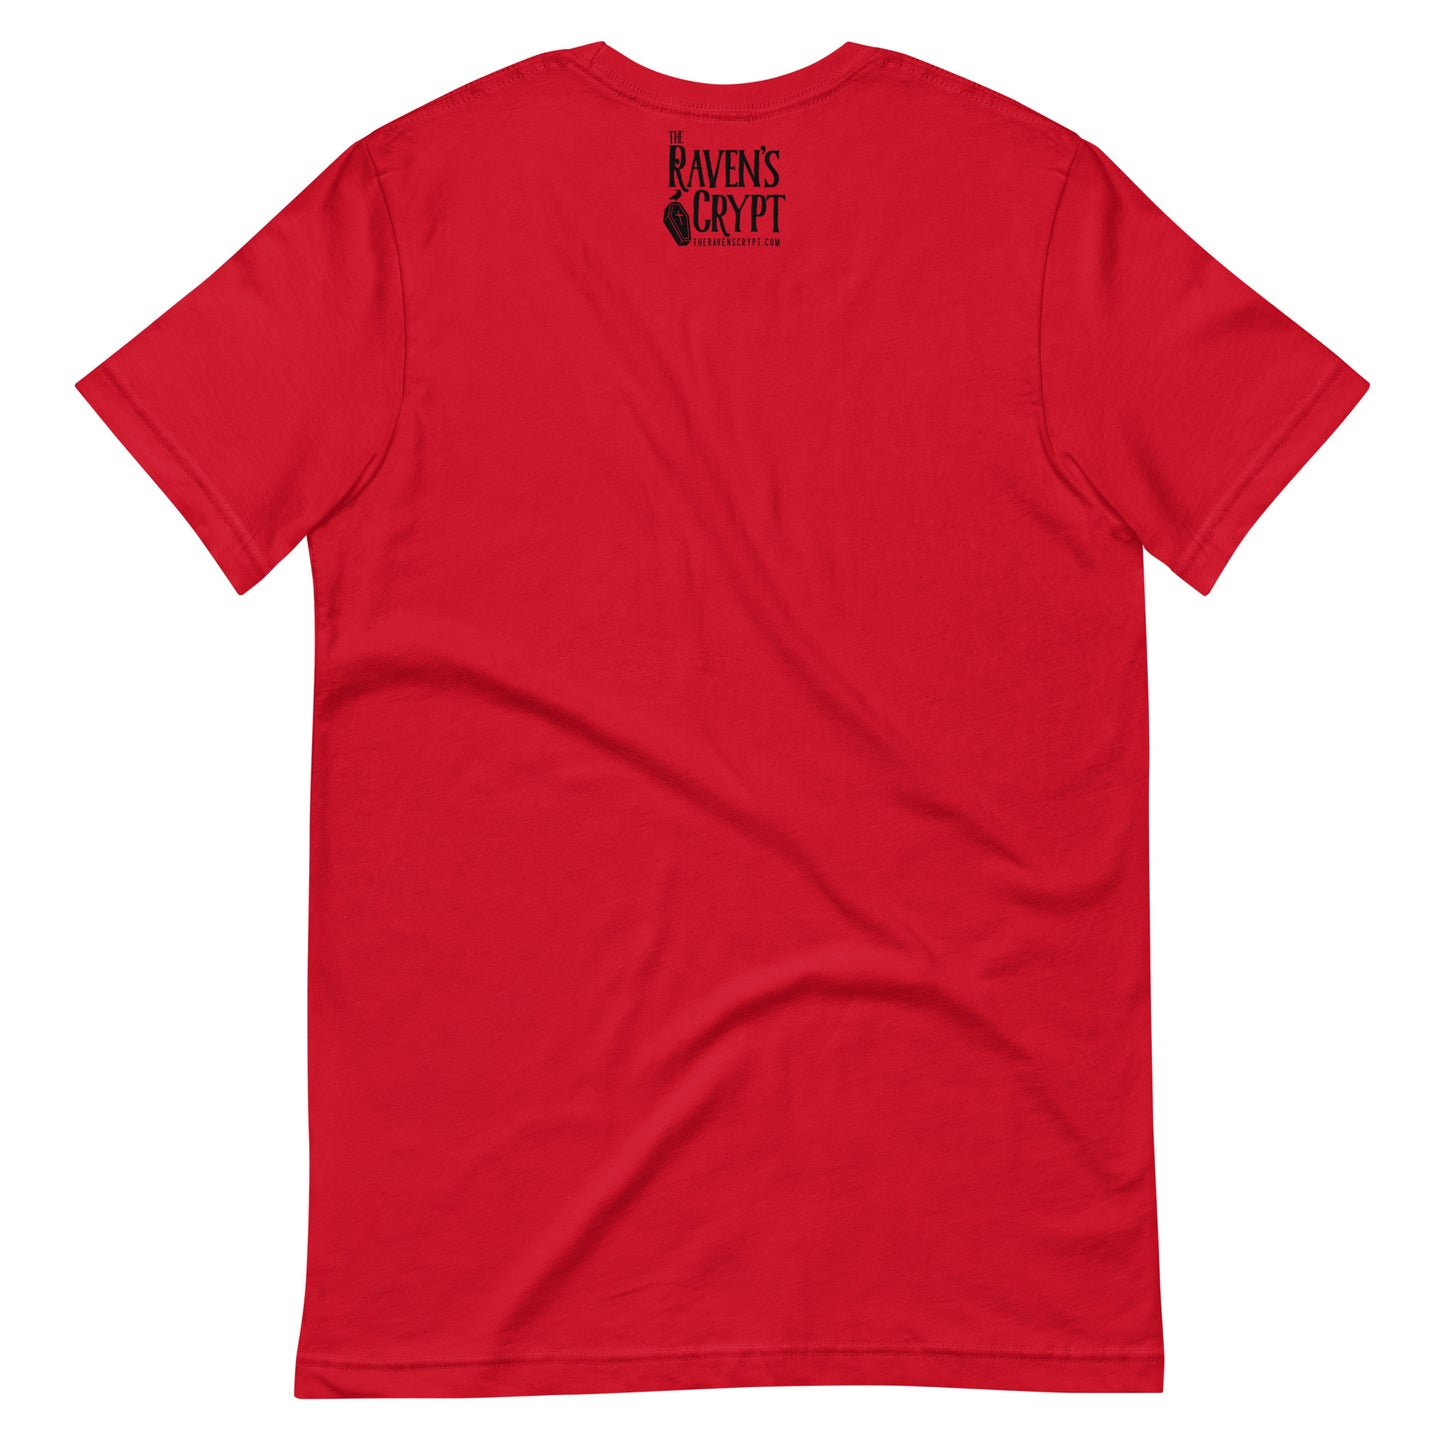 Boom as Hell Black - Men's t-shirt - Red Back